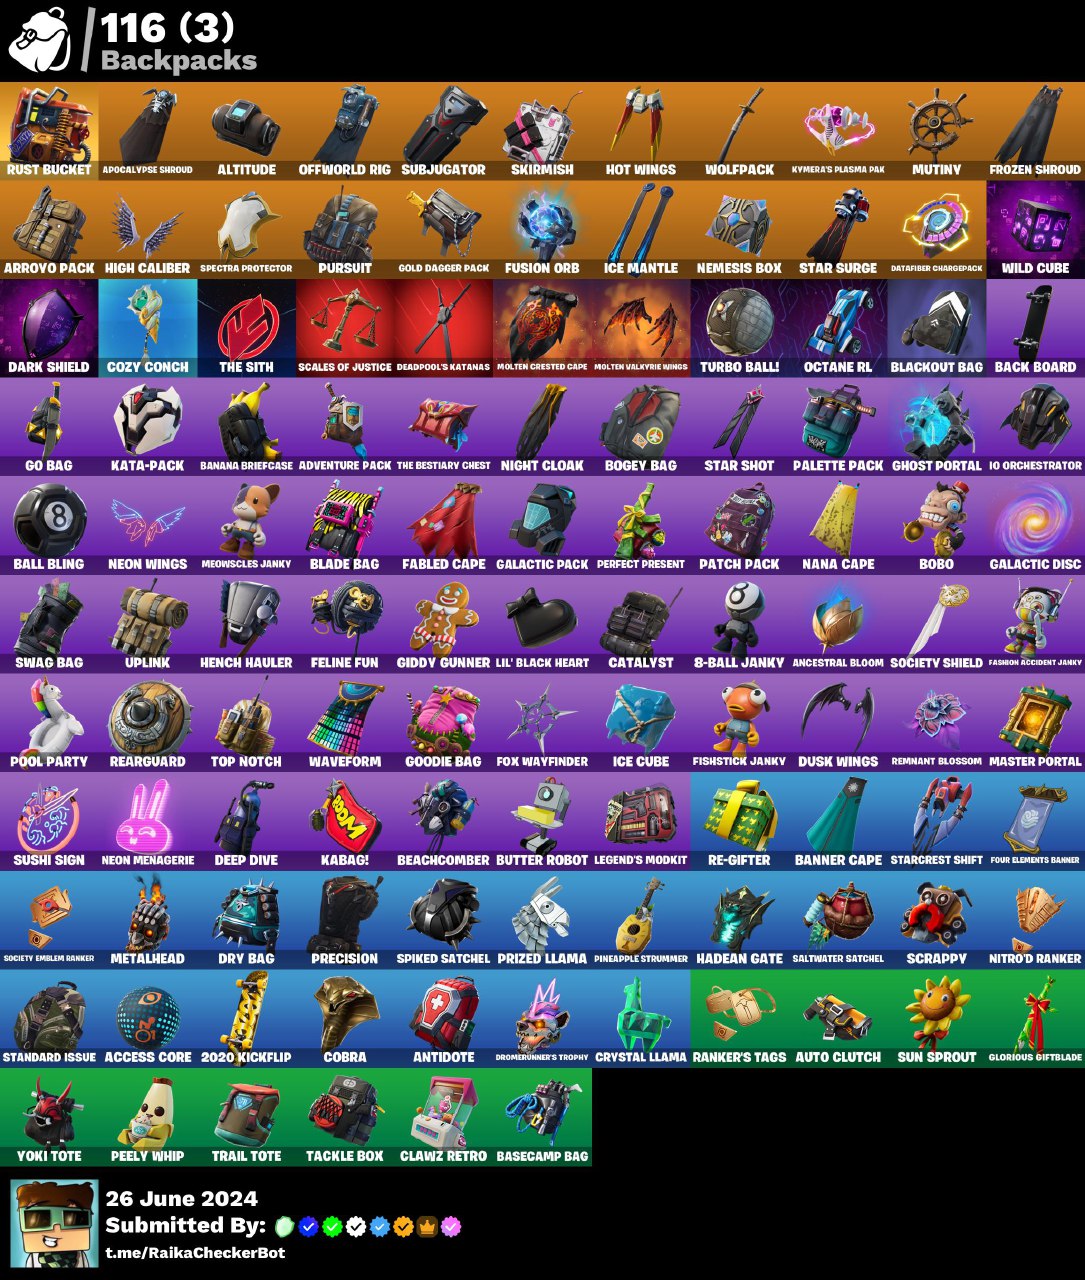 FA [PC/XBOX] 104 skins | GALAXY , MERRY MINT AXE , Gold Brutus , Gold Midas , Rogue Agent , Major Glory , Psycho Bandit